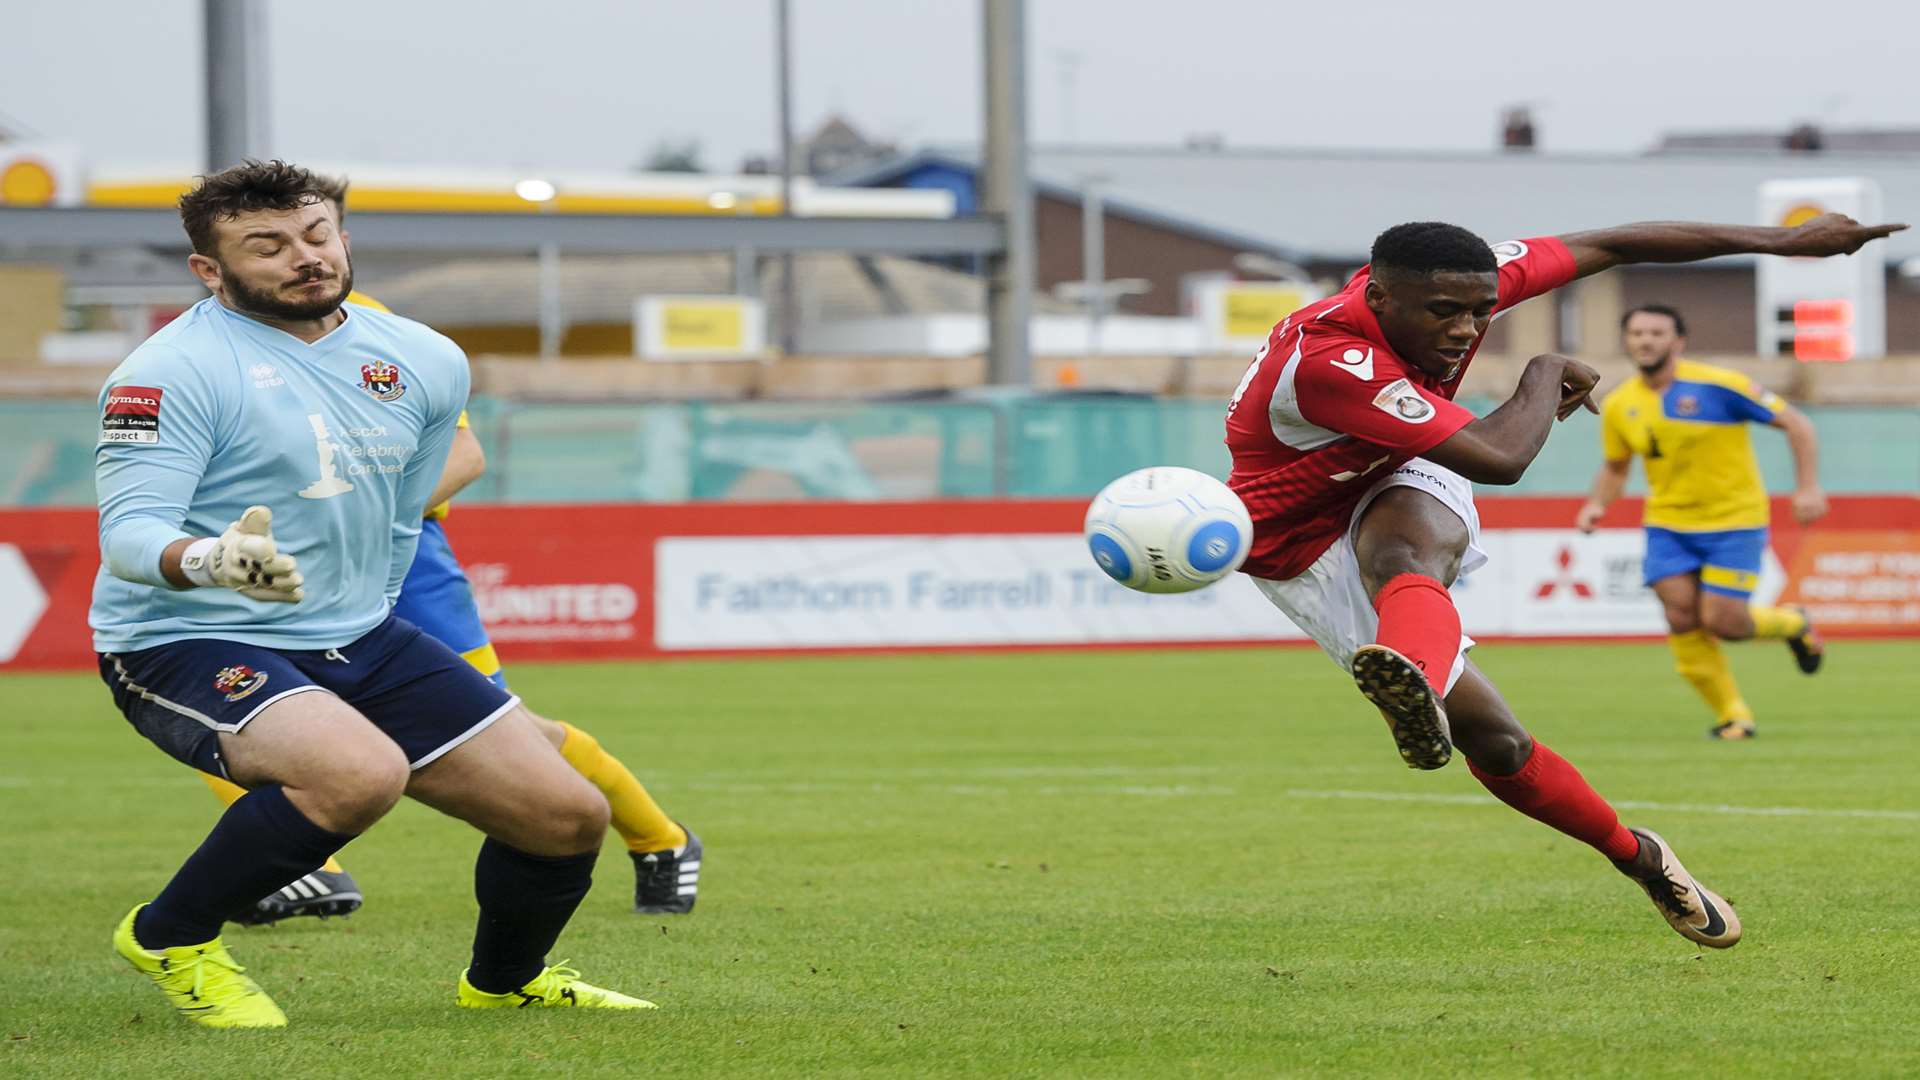 Darren McQueen fires home the second Fleet goal on Saturday. Picture: Andy Payton